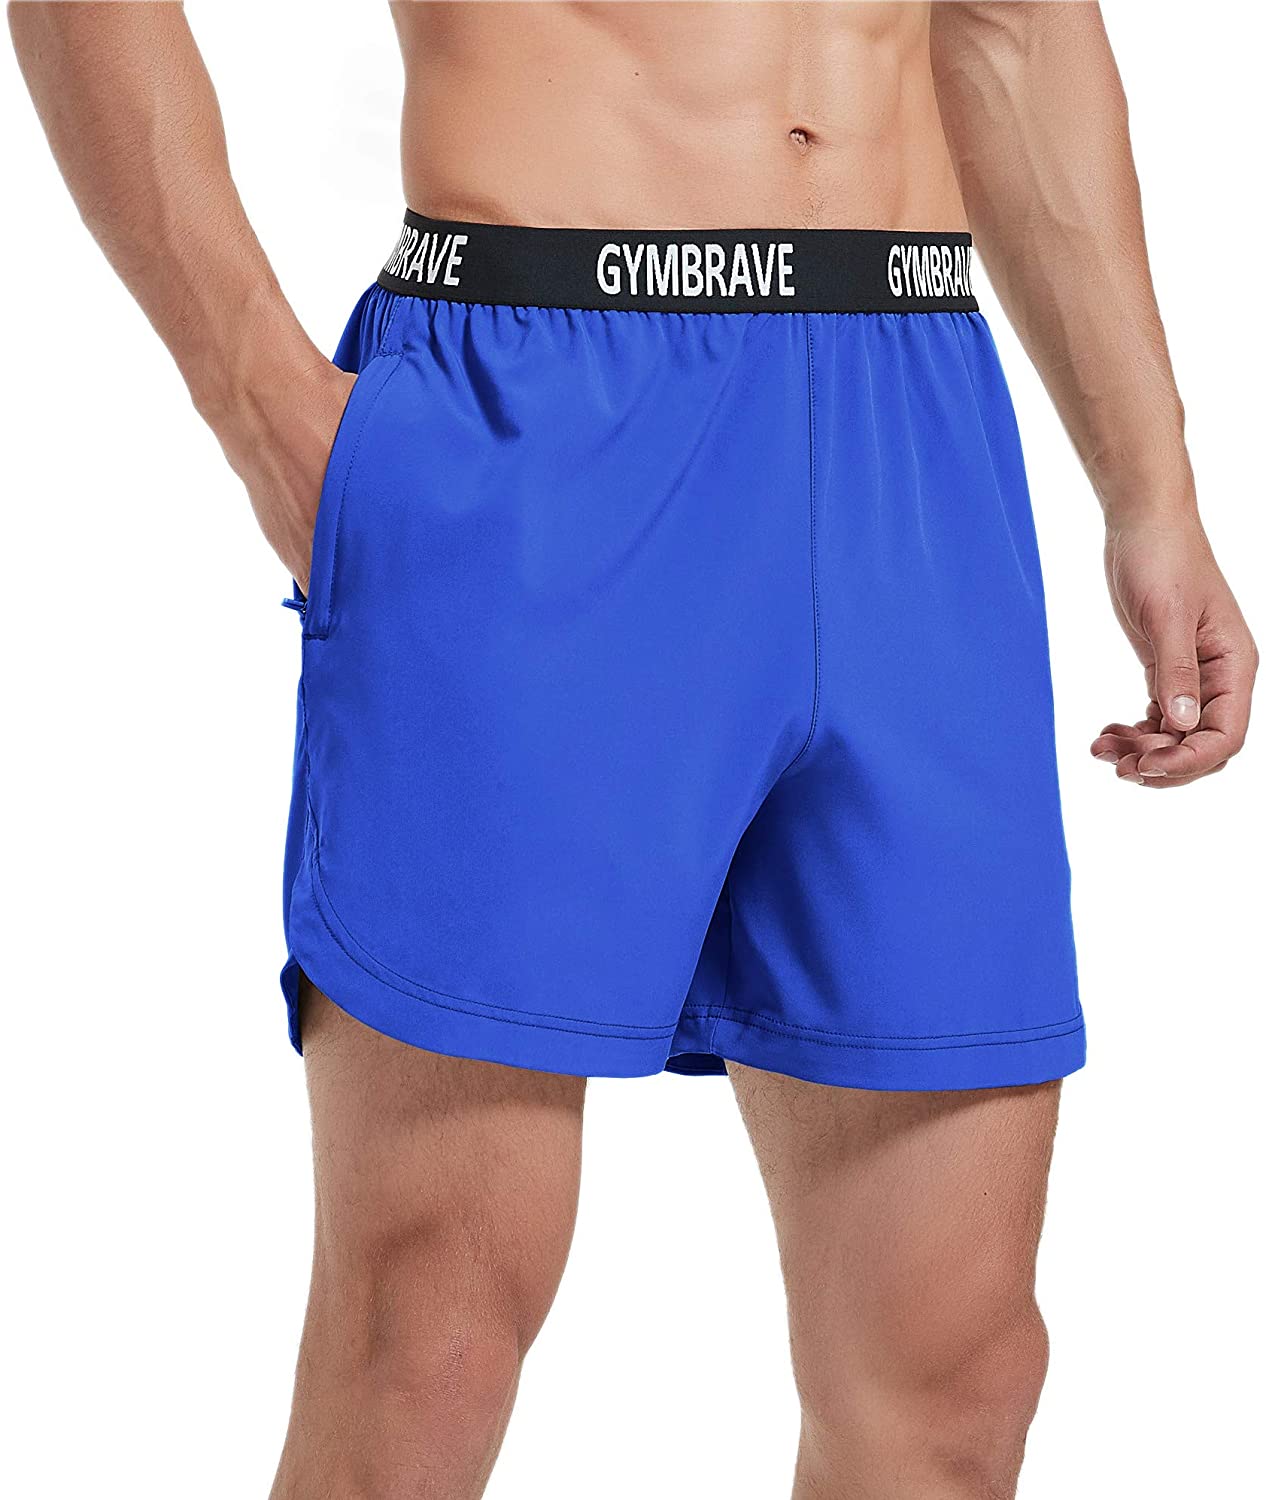 GymBrave Men's 5 Inches Athletic Running Shorts Lightweight Quick Dry Workout Training Short with Zip Pockets 